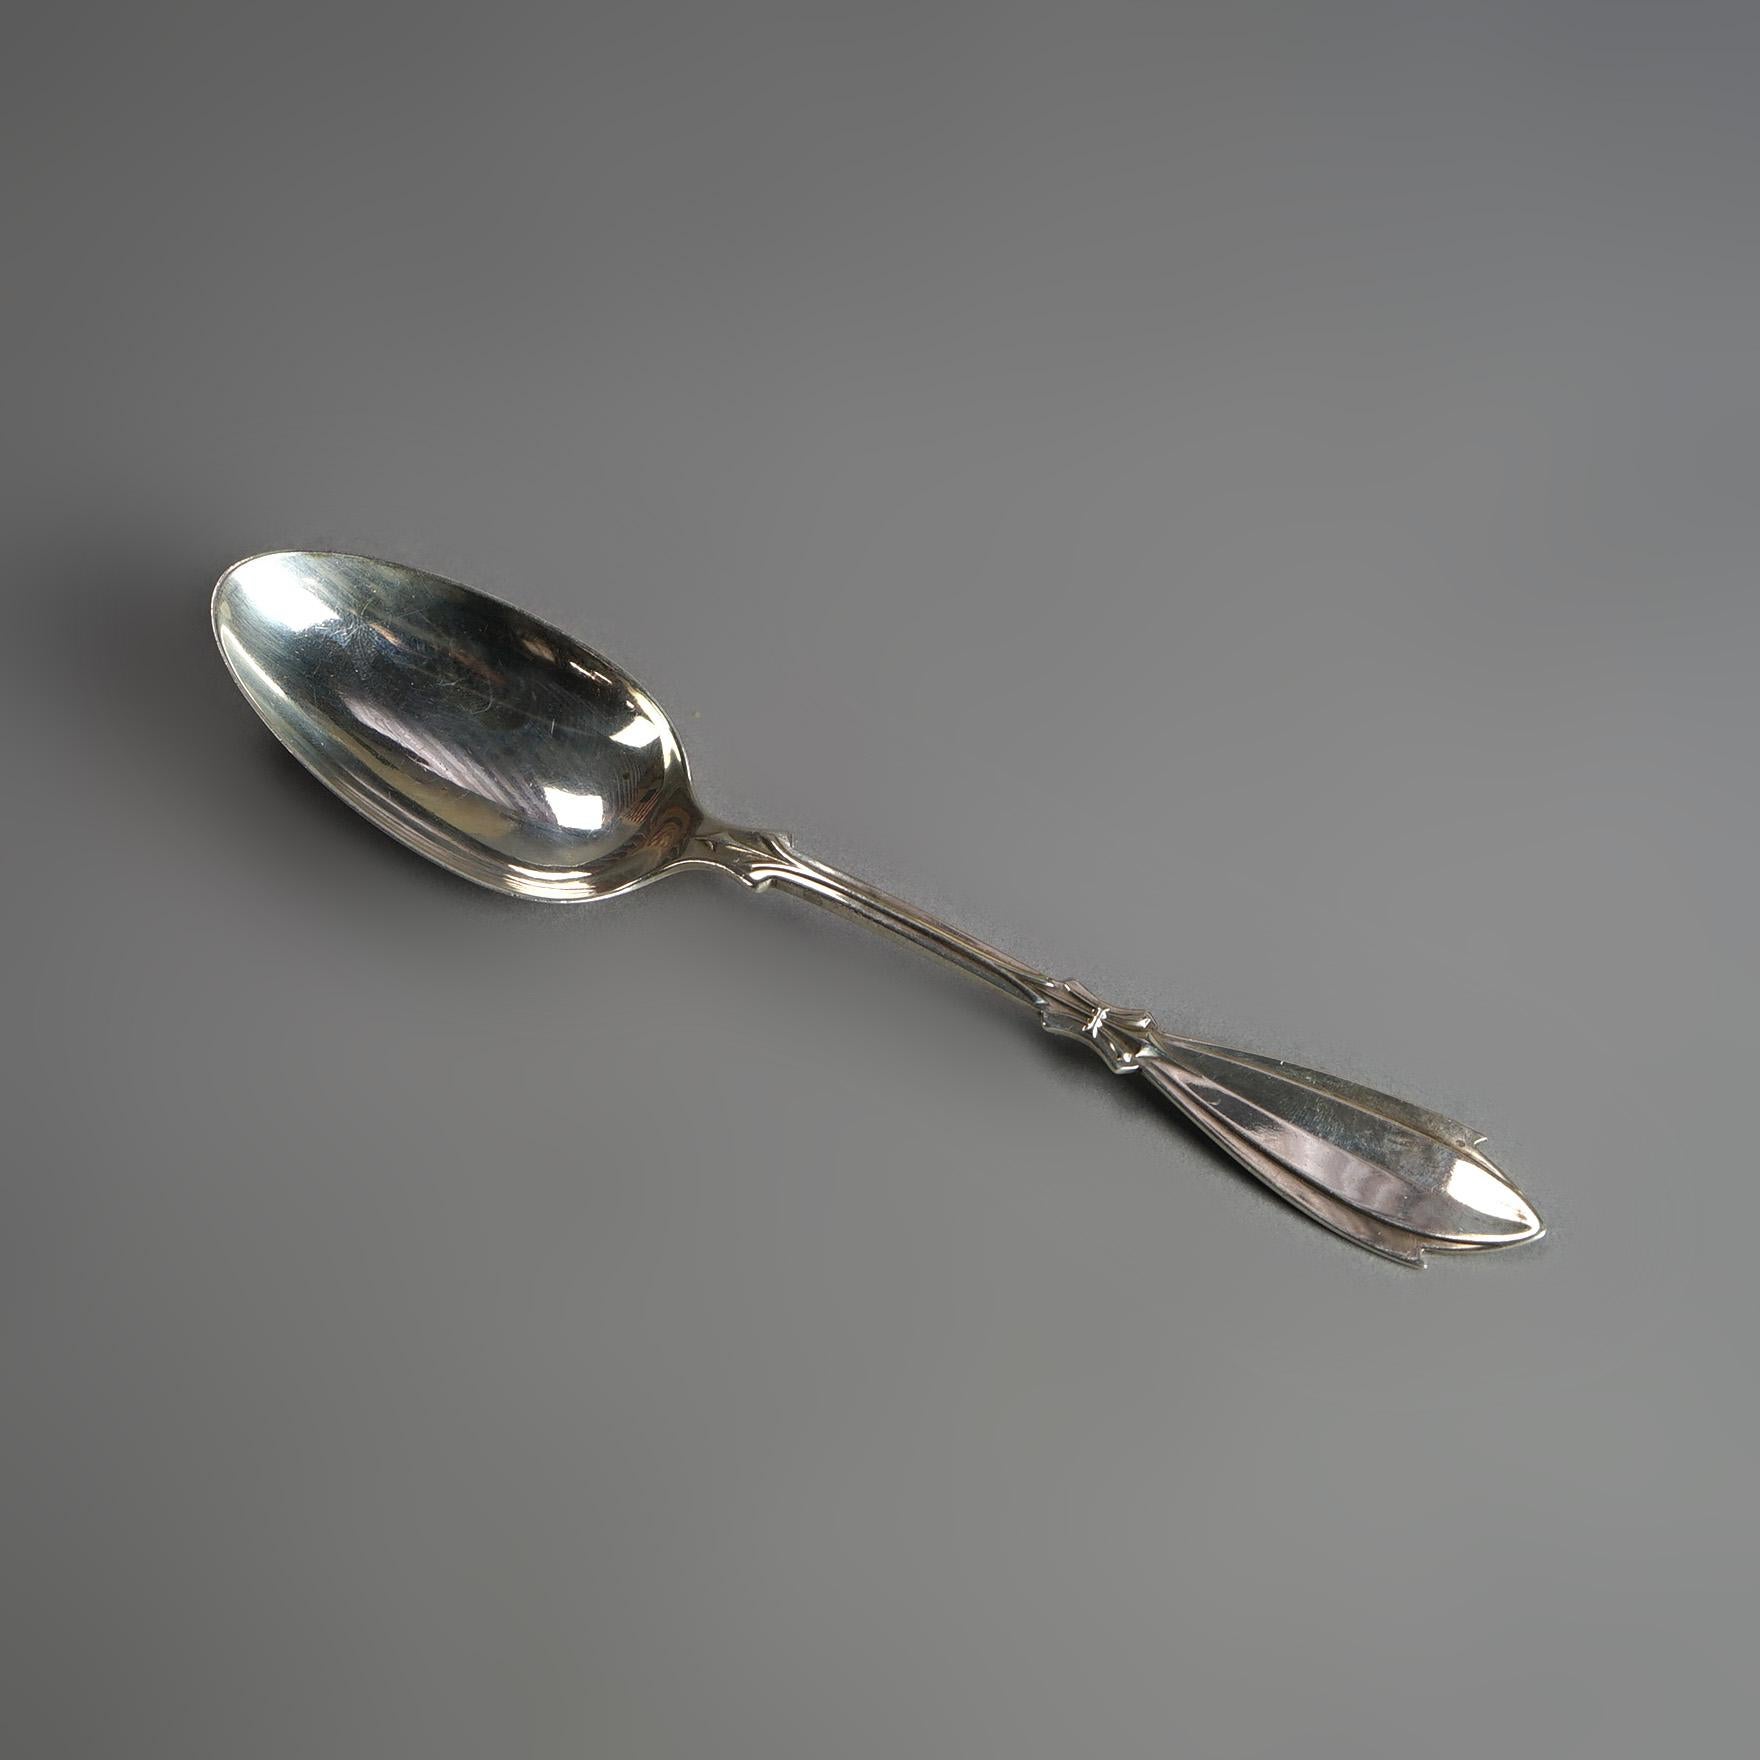 Antique Set of 12 Silver Tablespoons by Albert Coles C1850, 22.4 TOZ

Measures- 8''H x 1.75''W x 2.25''D